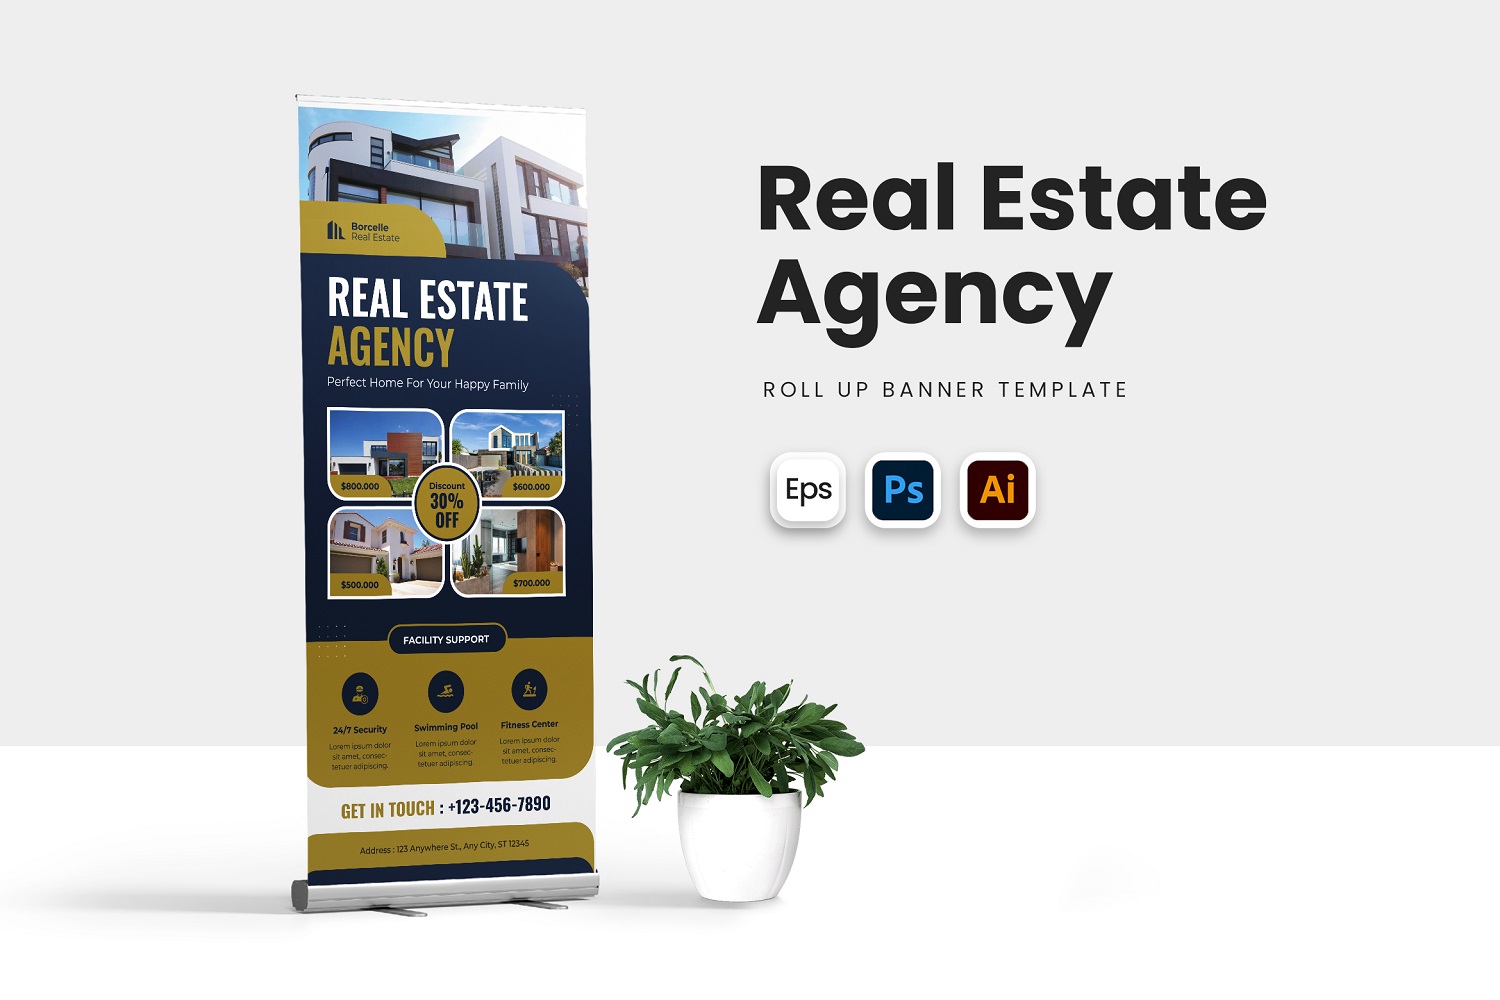 Real Estate Agency Roll Up Banner Template